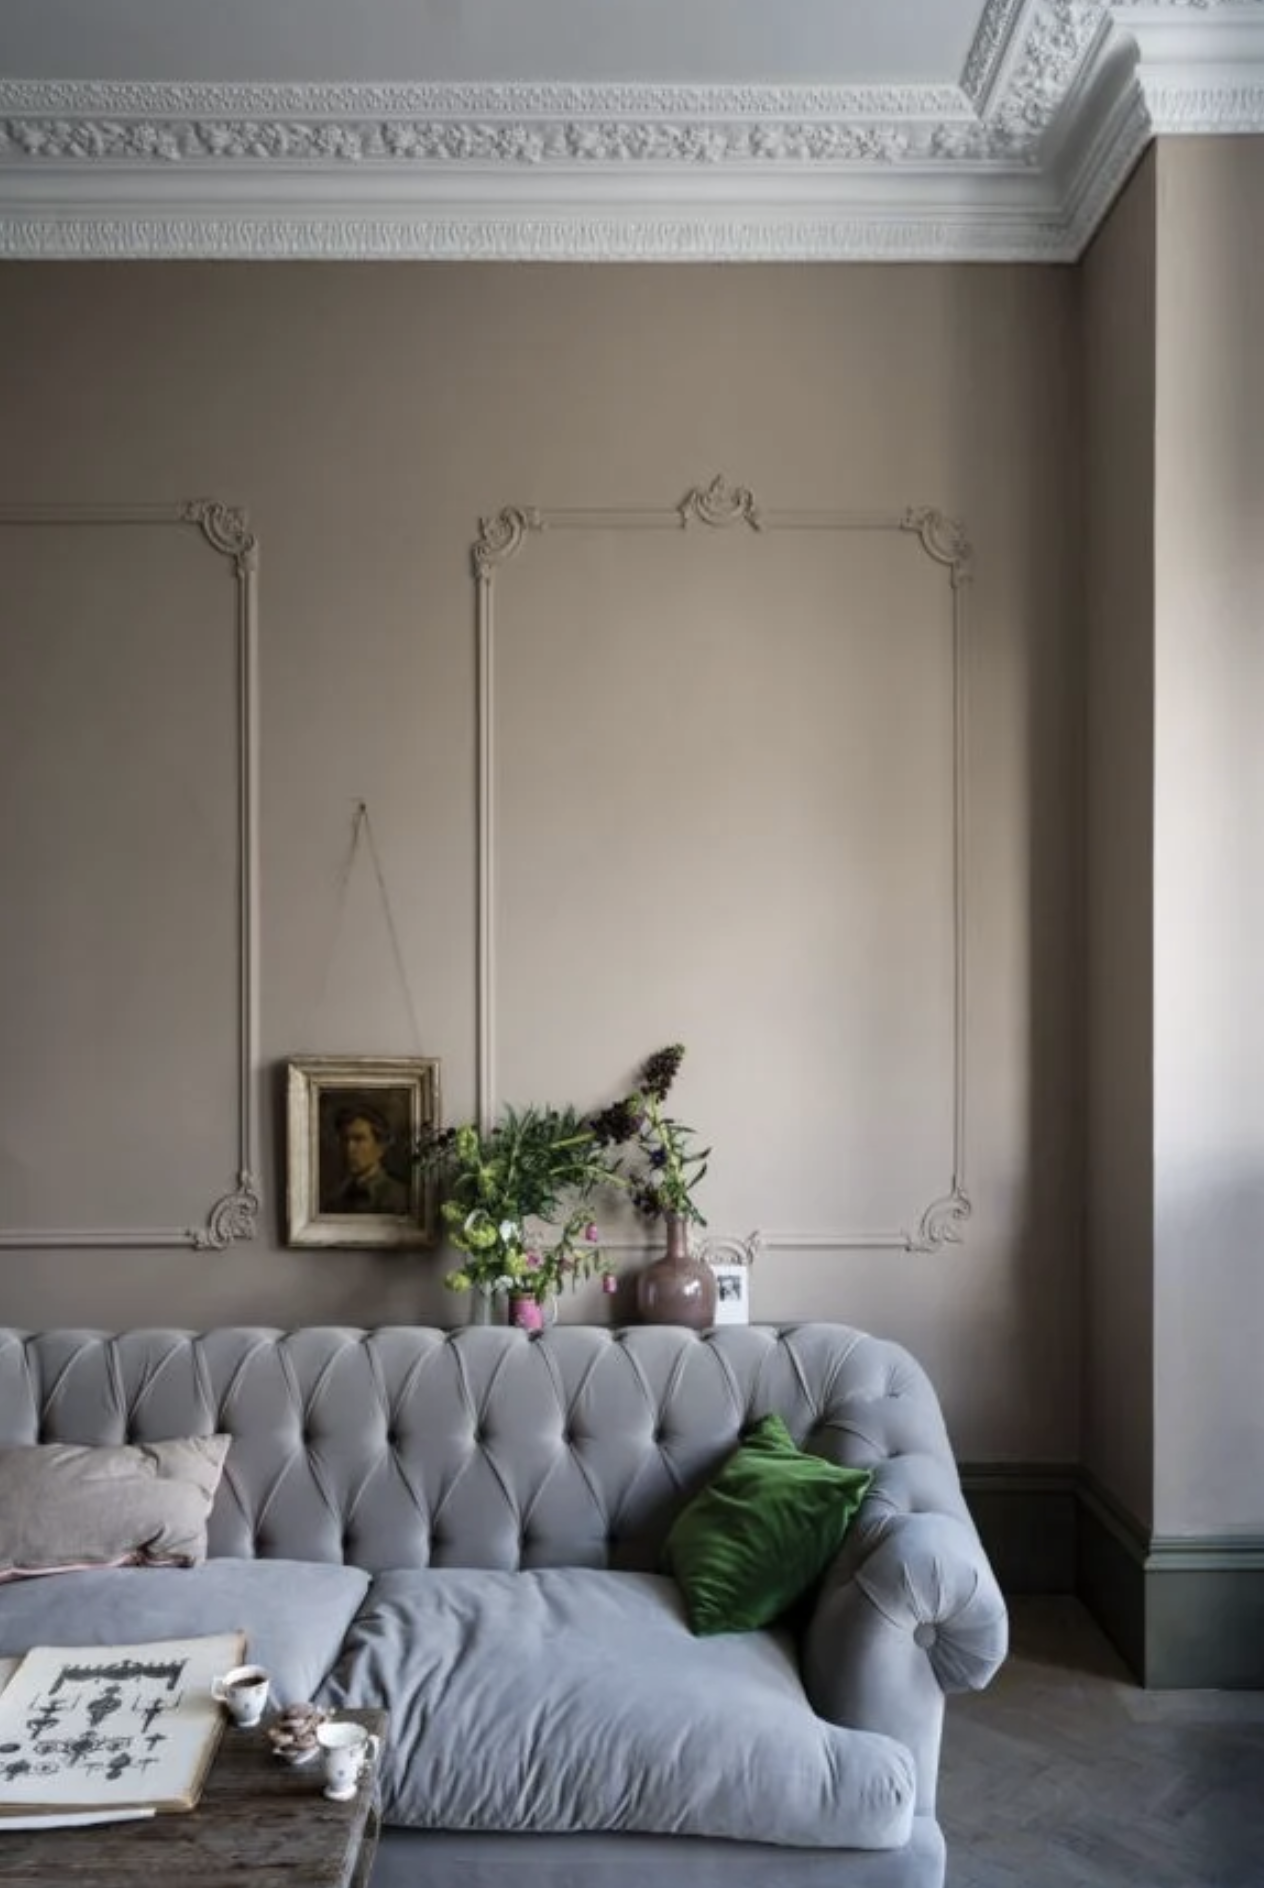 Farrow & Ball have revealed their colors of the year for 2021... Real